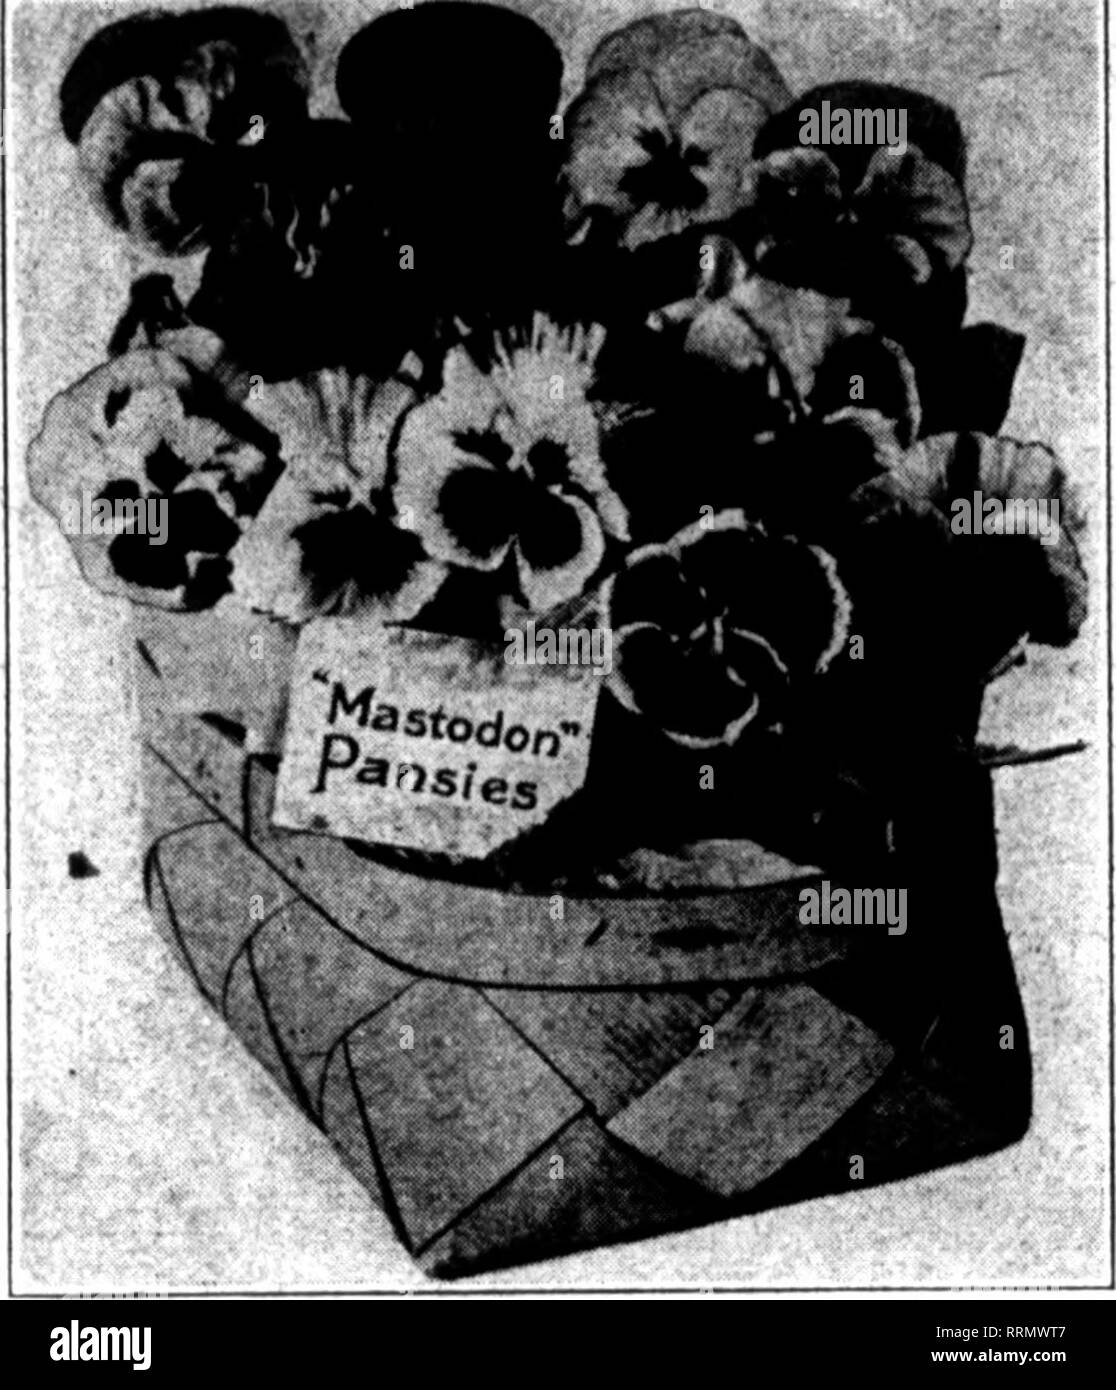 . Florists' review [microform]. Floriculture. •».$? -1 60 •,?,  • - &gt; ??/???. r • &quot;? '-^ -,.•',-.?&gt;.'.;./ • A:.-,^:7-.vn;-?,'.? The Florists^ Review ^^^: :l-.-¥ AUGUST 24, 19J6. large catalogue descriptive of the prod- ucts of the Eureka nursery. One of the largest shippers of plu- mosus in California, Walter Armacost &amp; Co., of Sawtelle, are planning to in- crease their facilities for growing this asparagus. Five acres adjoining the company's place at Fifteenth and La Grange streets have been purchased and lath houses for plumosus will be erected on this. Three and one-half acre Stock Photo